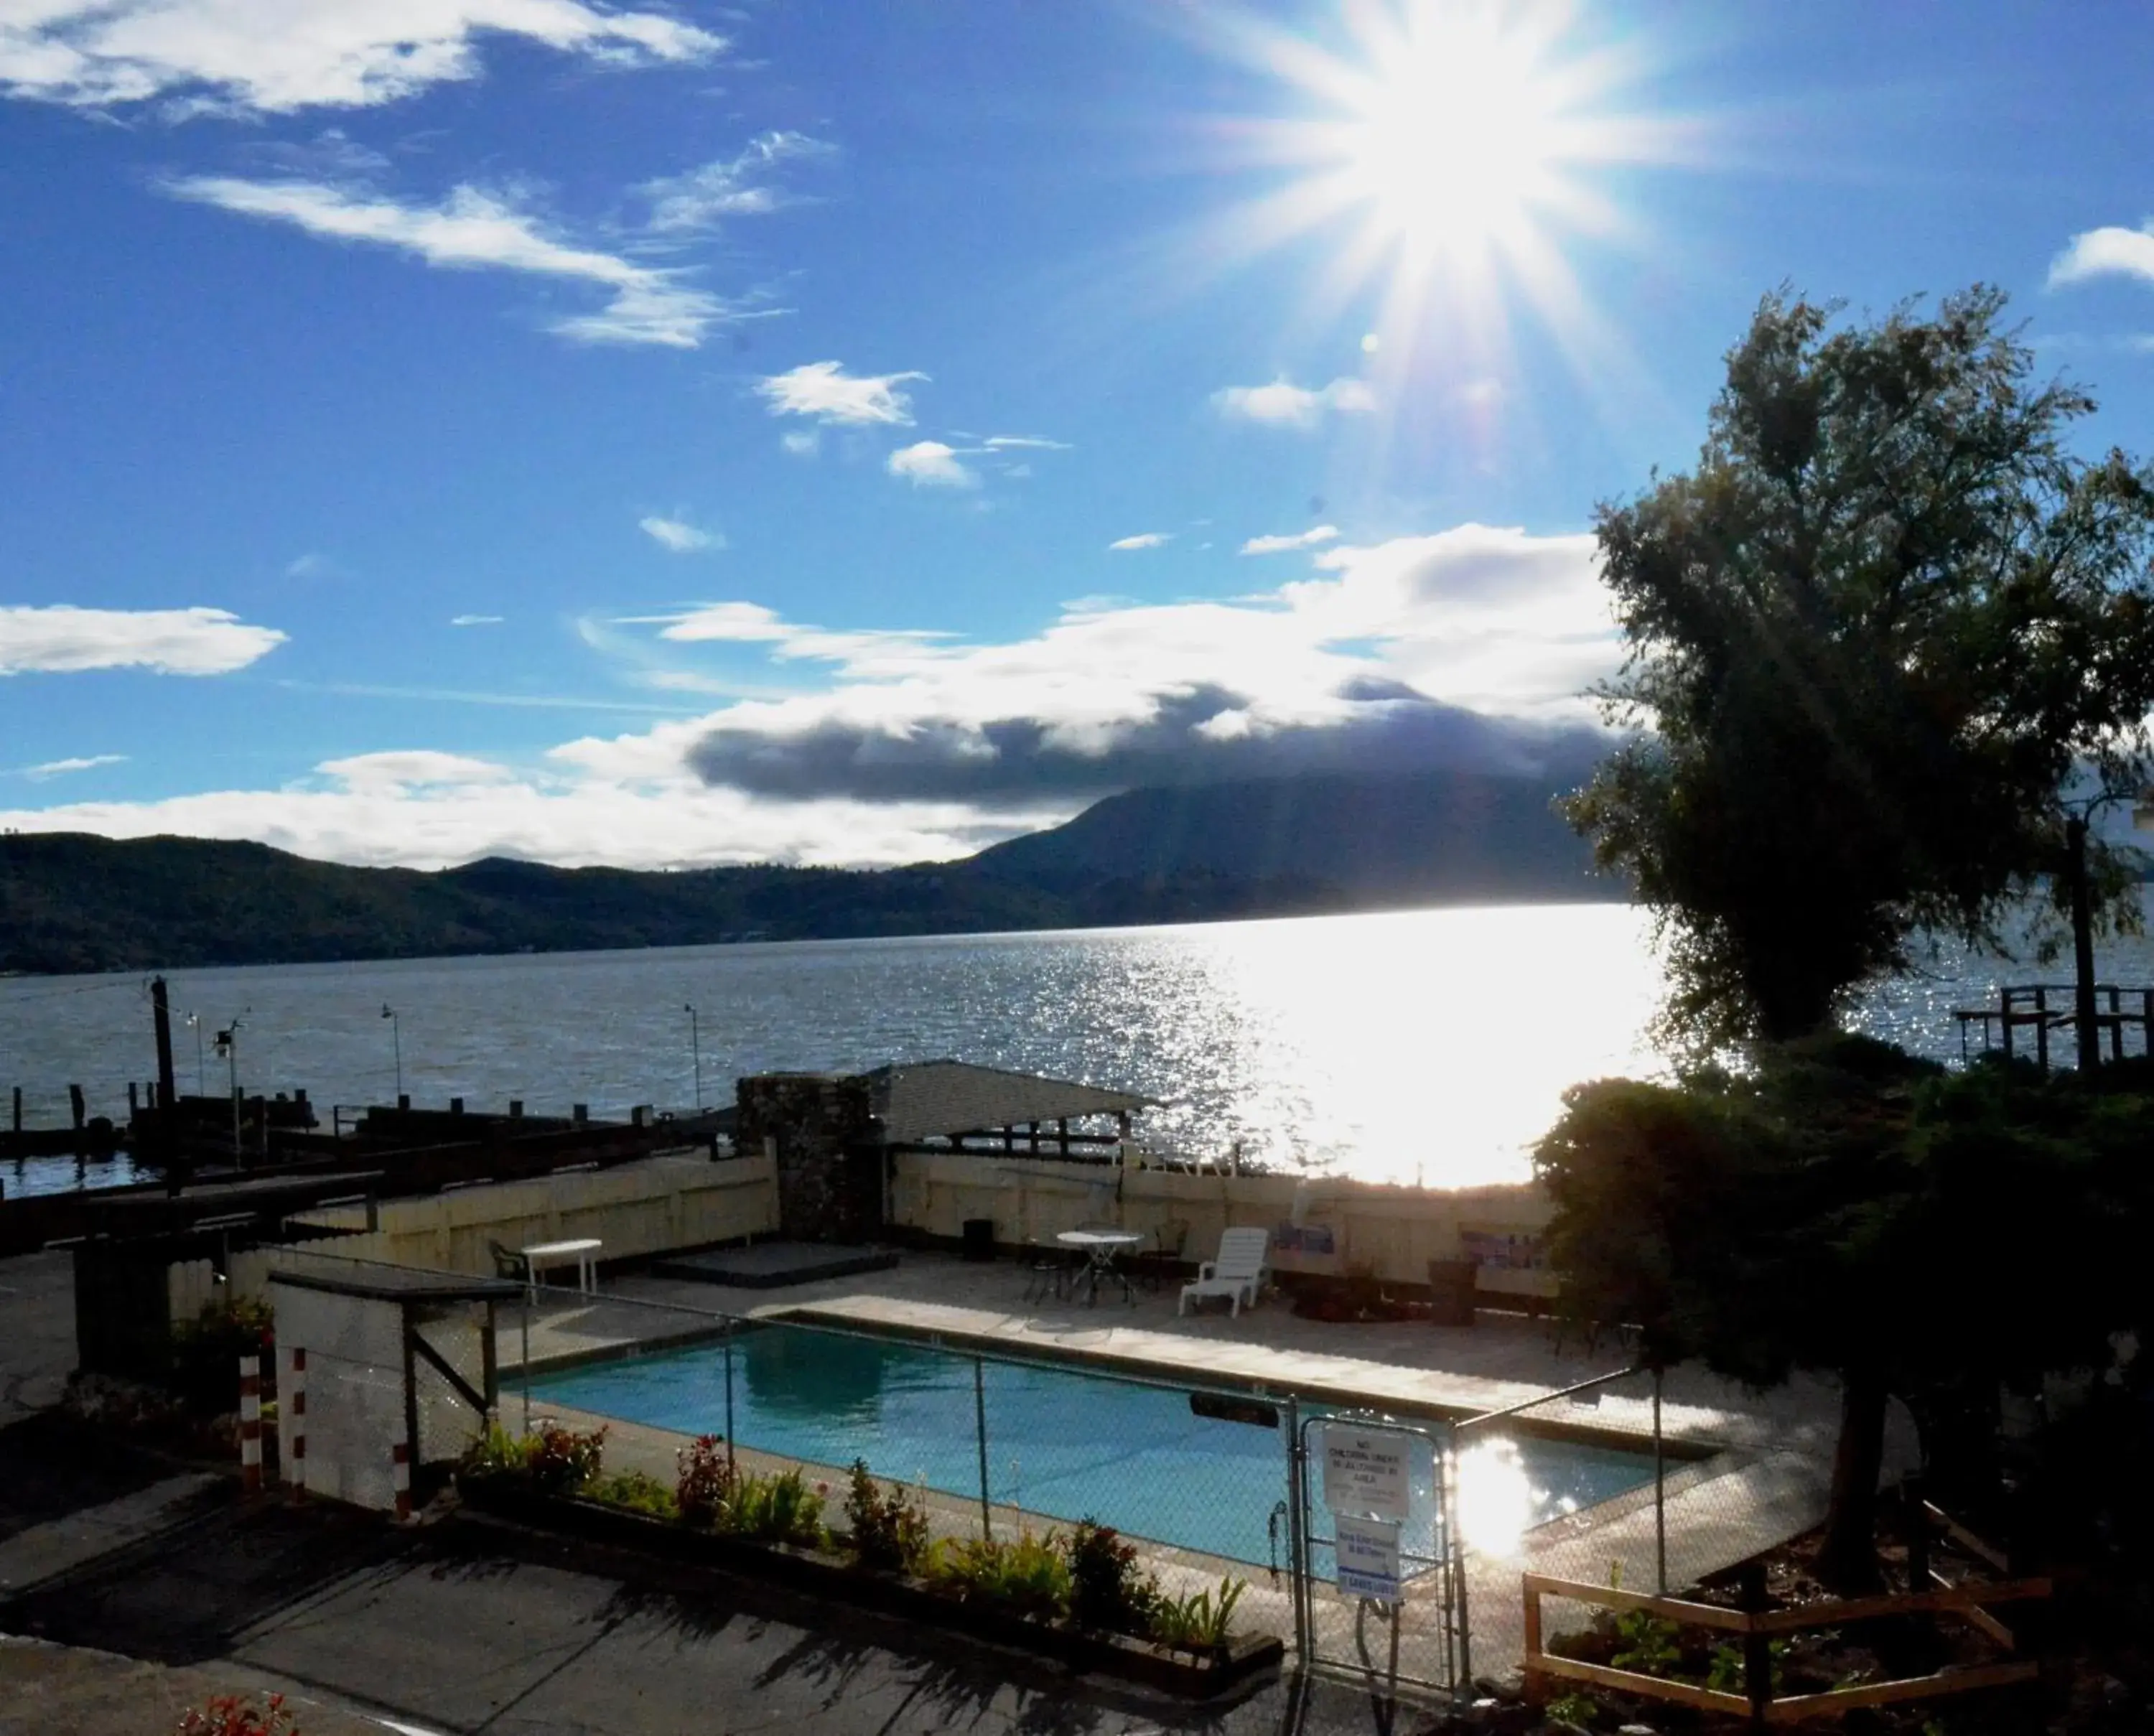 Lake view, Pool View in Lamplighter Motel Clearlake